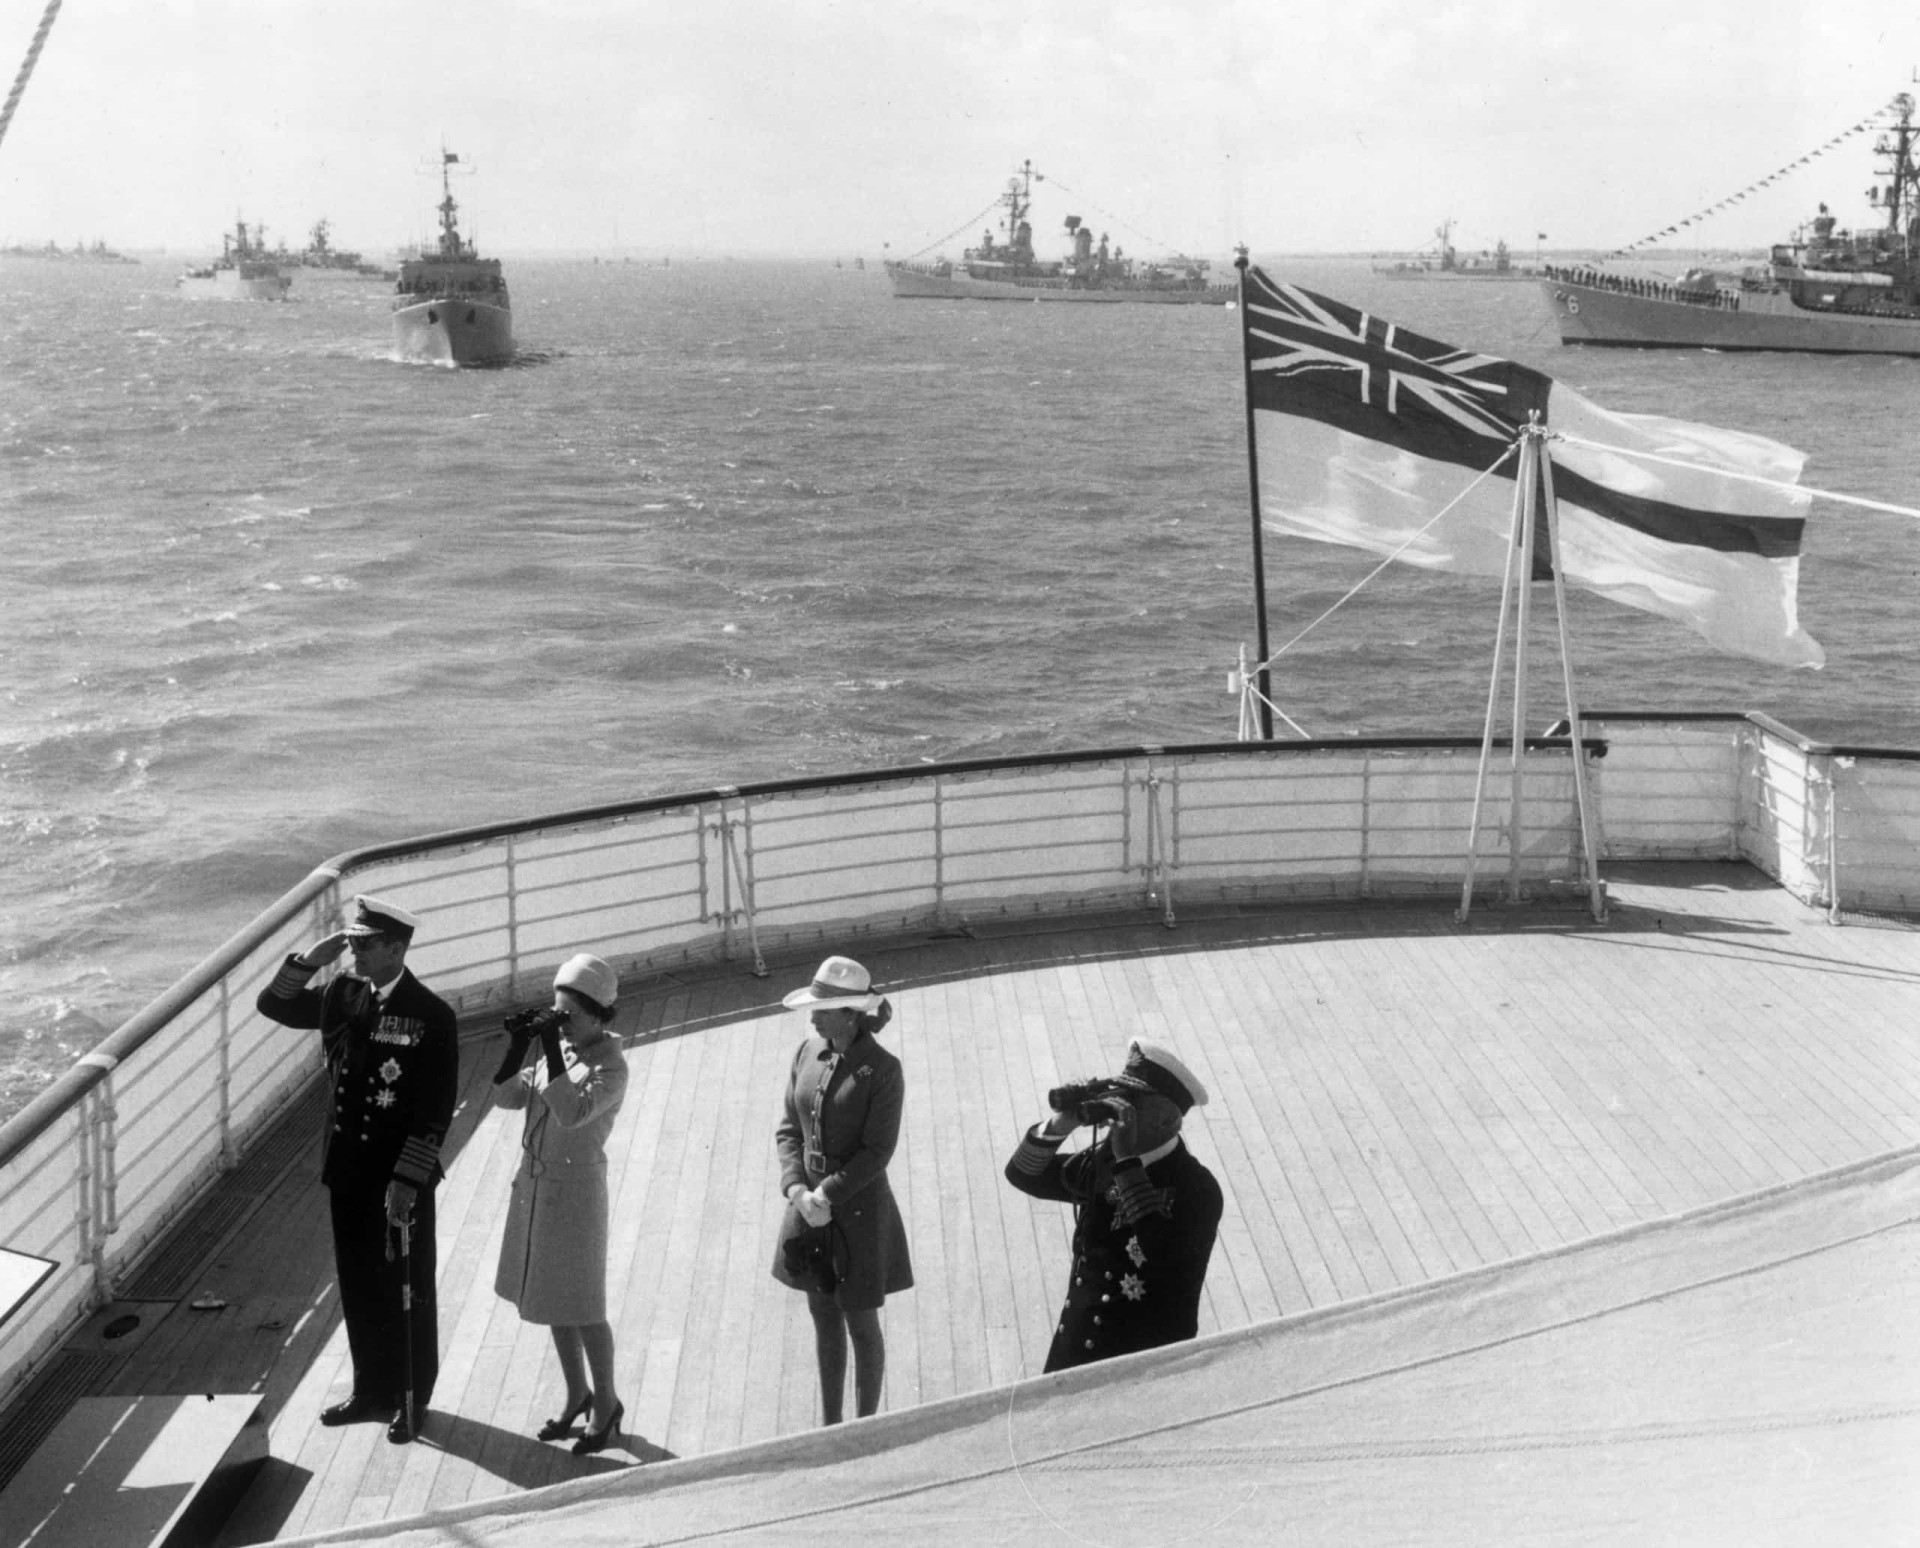 <p>Prince Philip, Queen Elizabeth II, Princess Anne, and Earl Mountbatten on board the Britannia at Spithead on the south coast of England during the Queen's review of the 62 ships of the North Atlantic Treaty Organization (NATO) fleet. This ceremony formed part of NATO's 20th-anniversary celebrations. </p><p><a href="https://www.msn.com/en-sg/community/channel/vid-7xx8mnucu55yw63we9va2gwr7uihbxwc68fxqp25x6tg4ftibpra?cvid=94631541bc0f4f89bfd59158d696ad7e">Follow us and access great exclusive content every day</a></p>